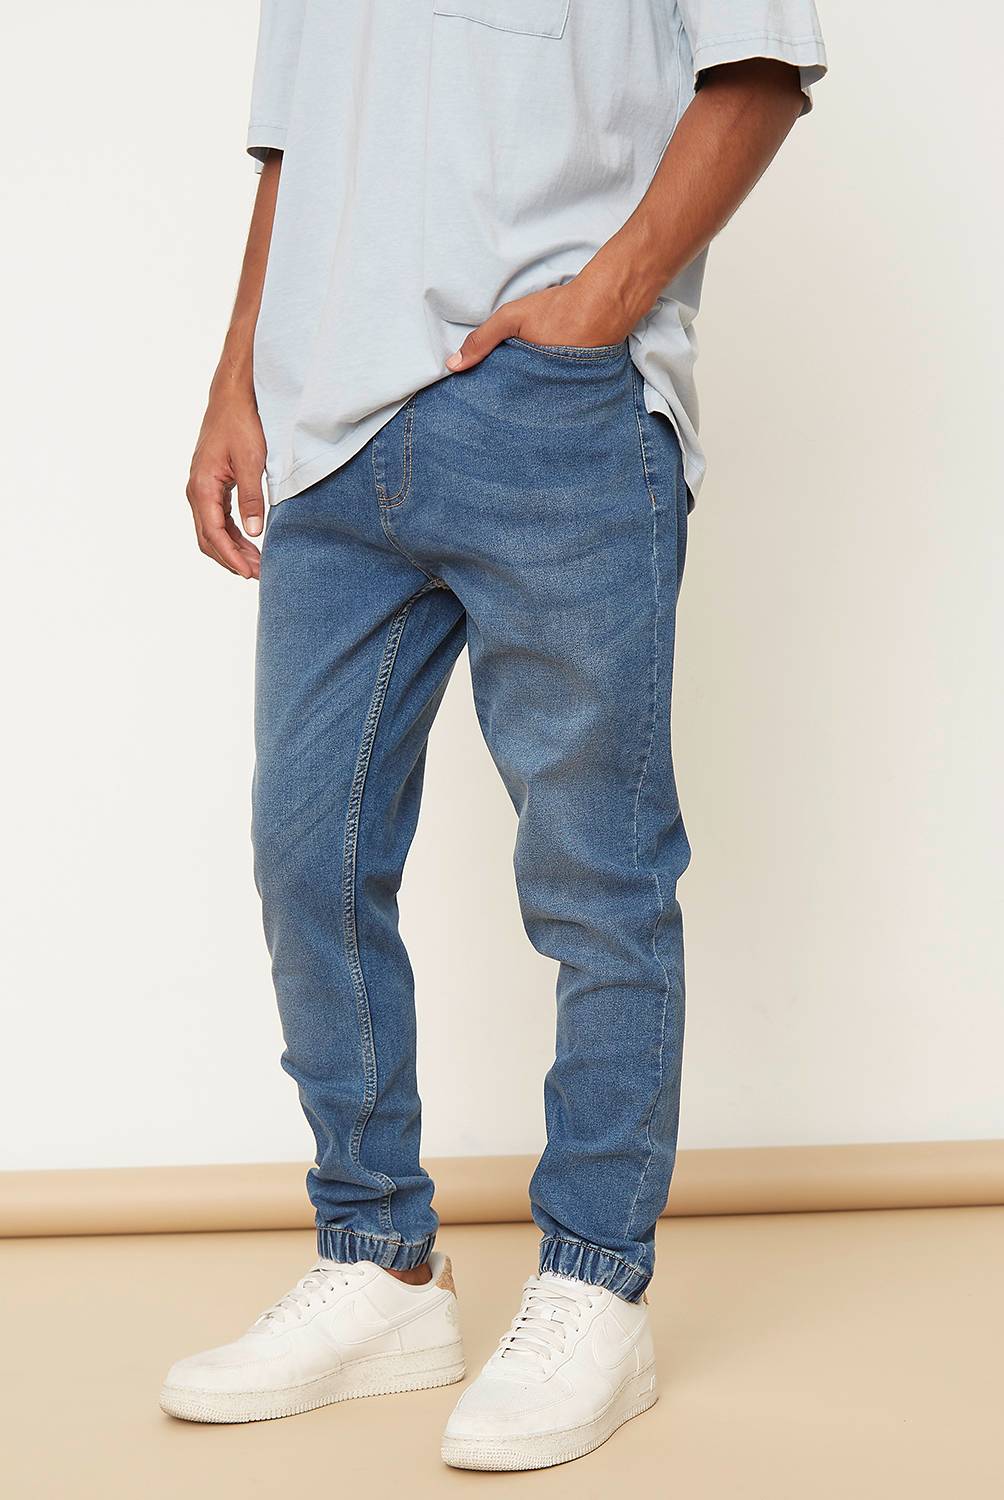 BEARCLIFF - Jeans Jogger Fit Hombre Bearcliff